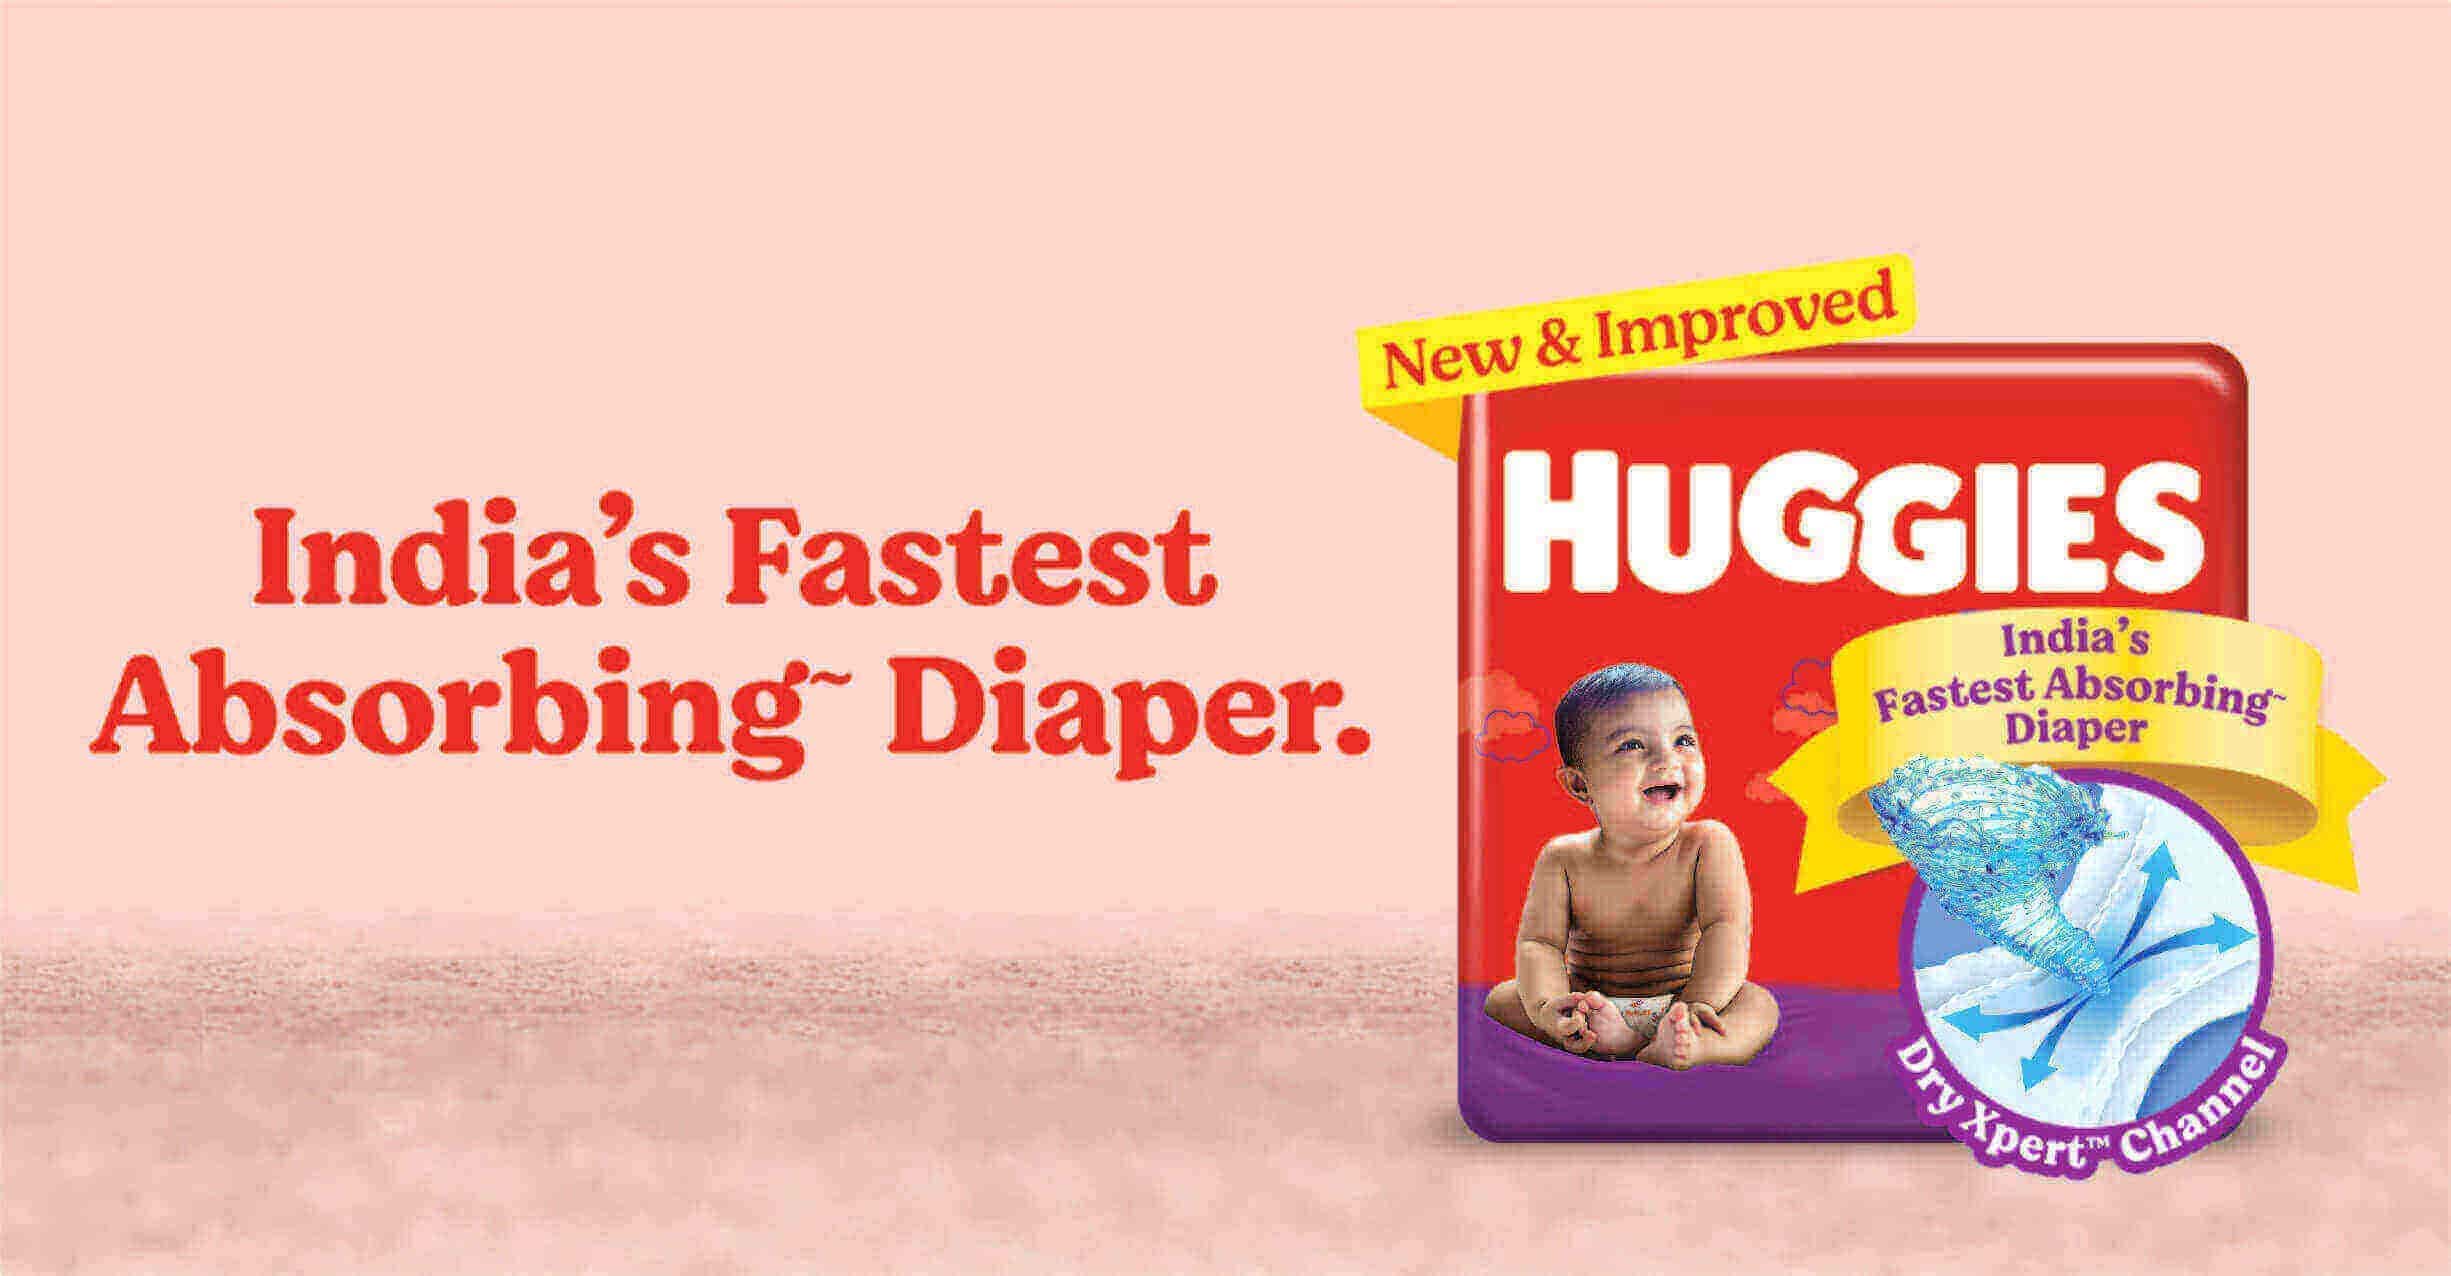 Huggies Wonder Pants Small Size Diapers (Pack of 2, 42 Counts per Pack)